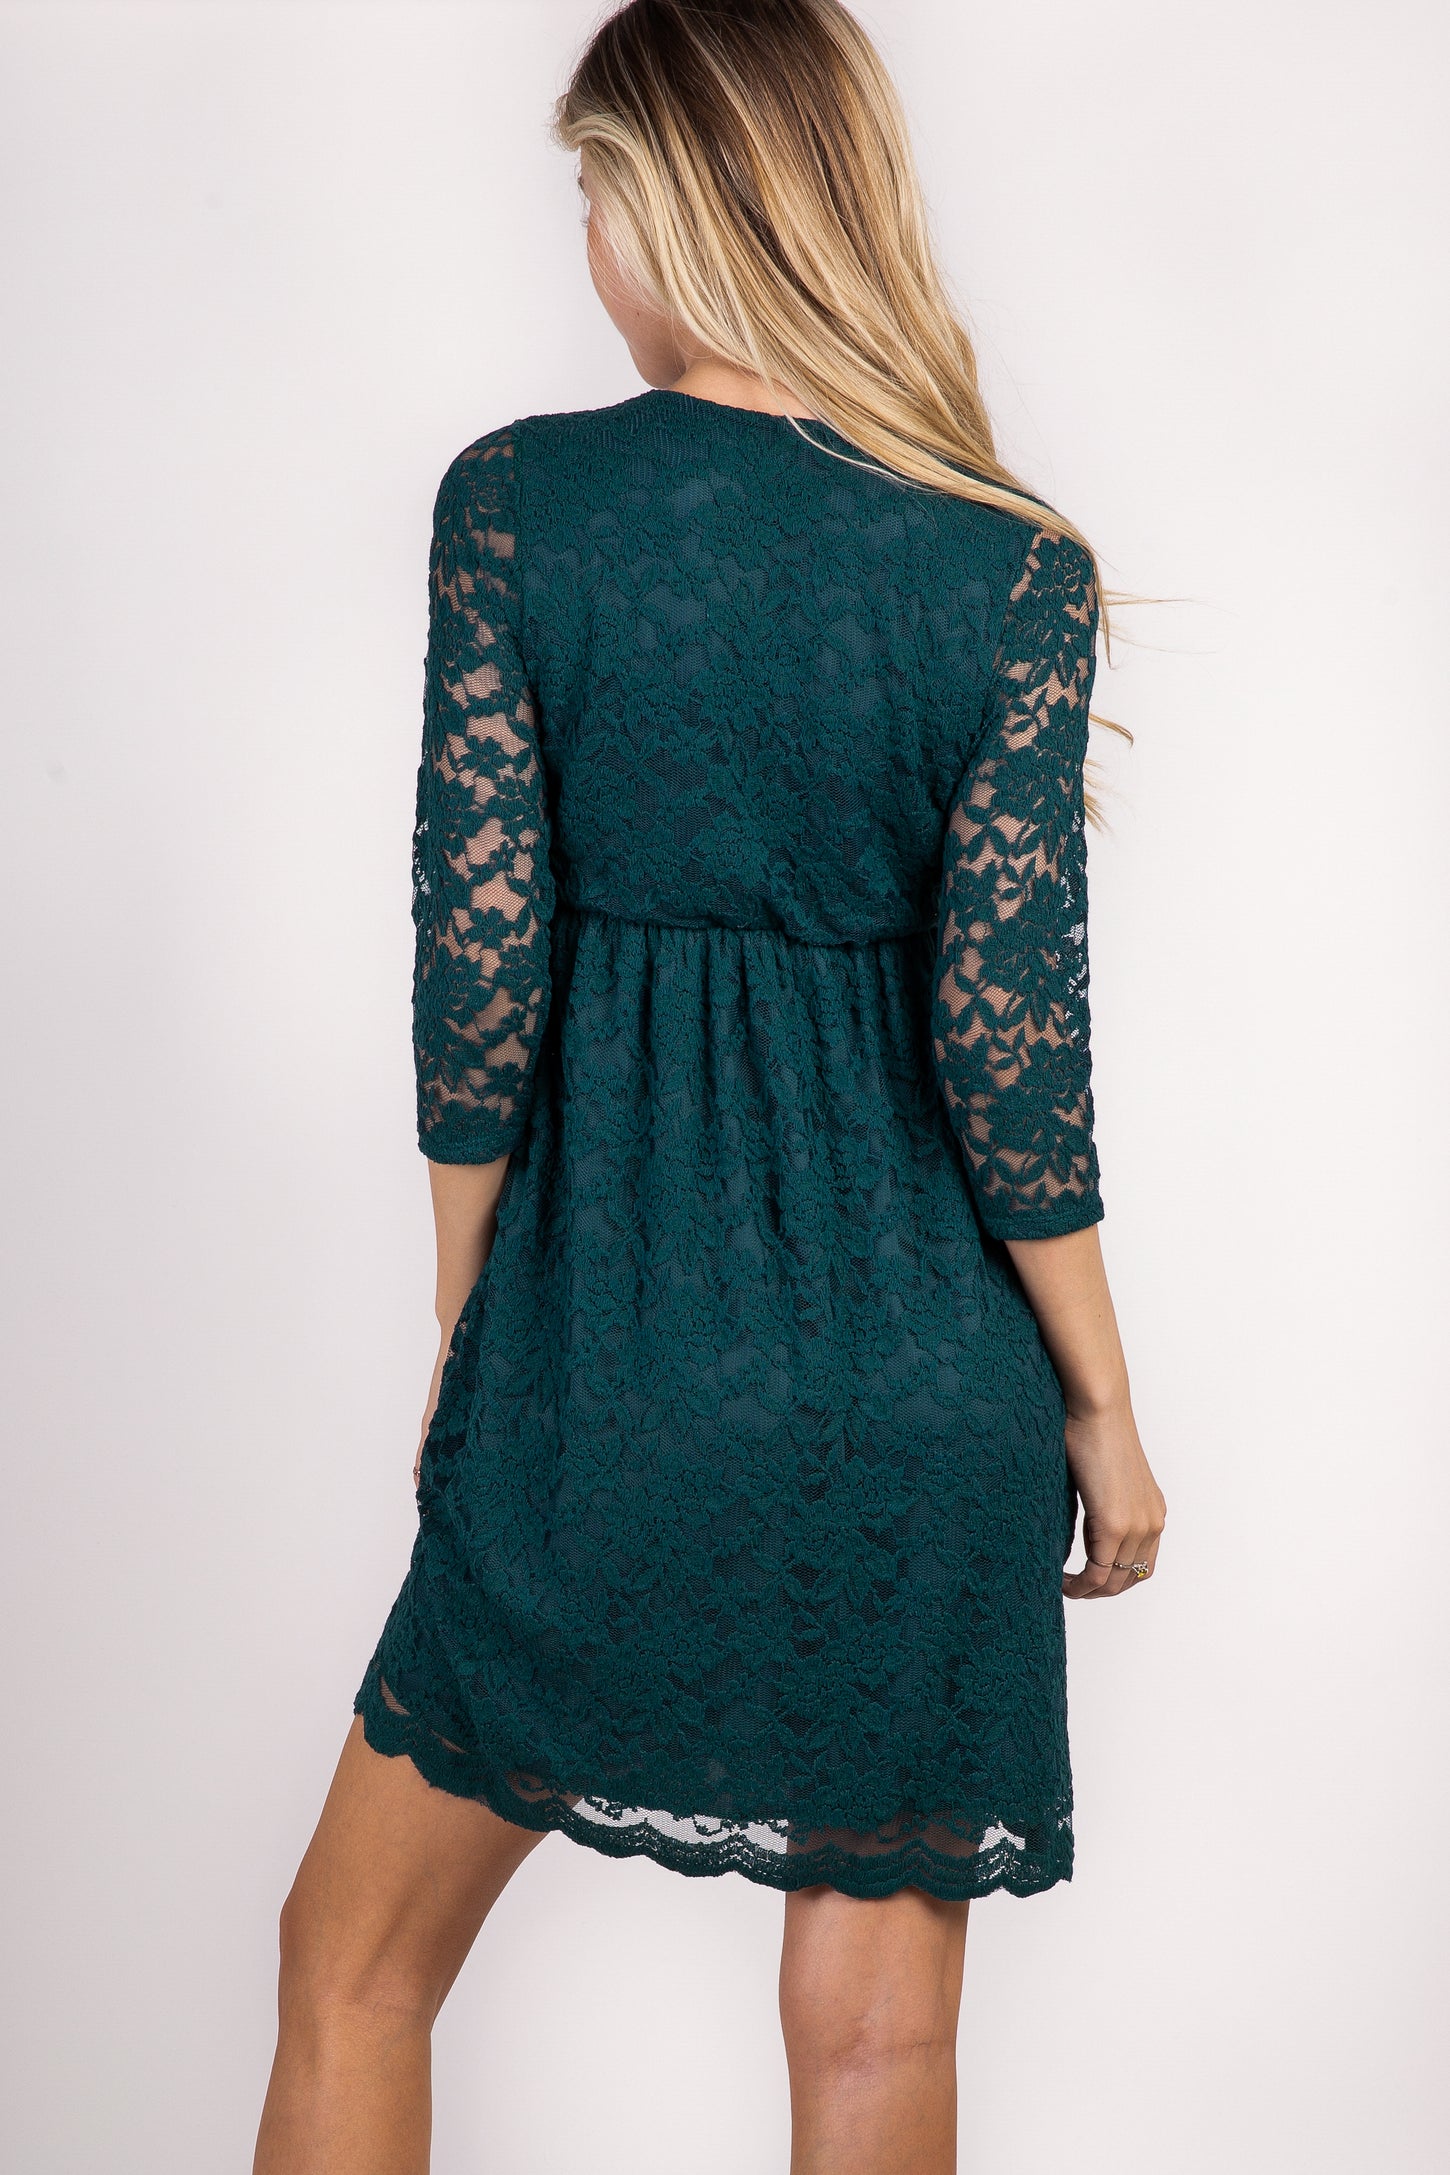 Forest Wrap Lace Overlay PinkBlush Green Dress–